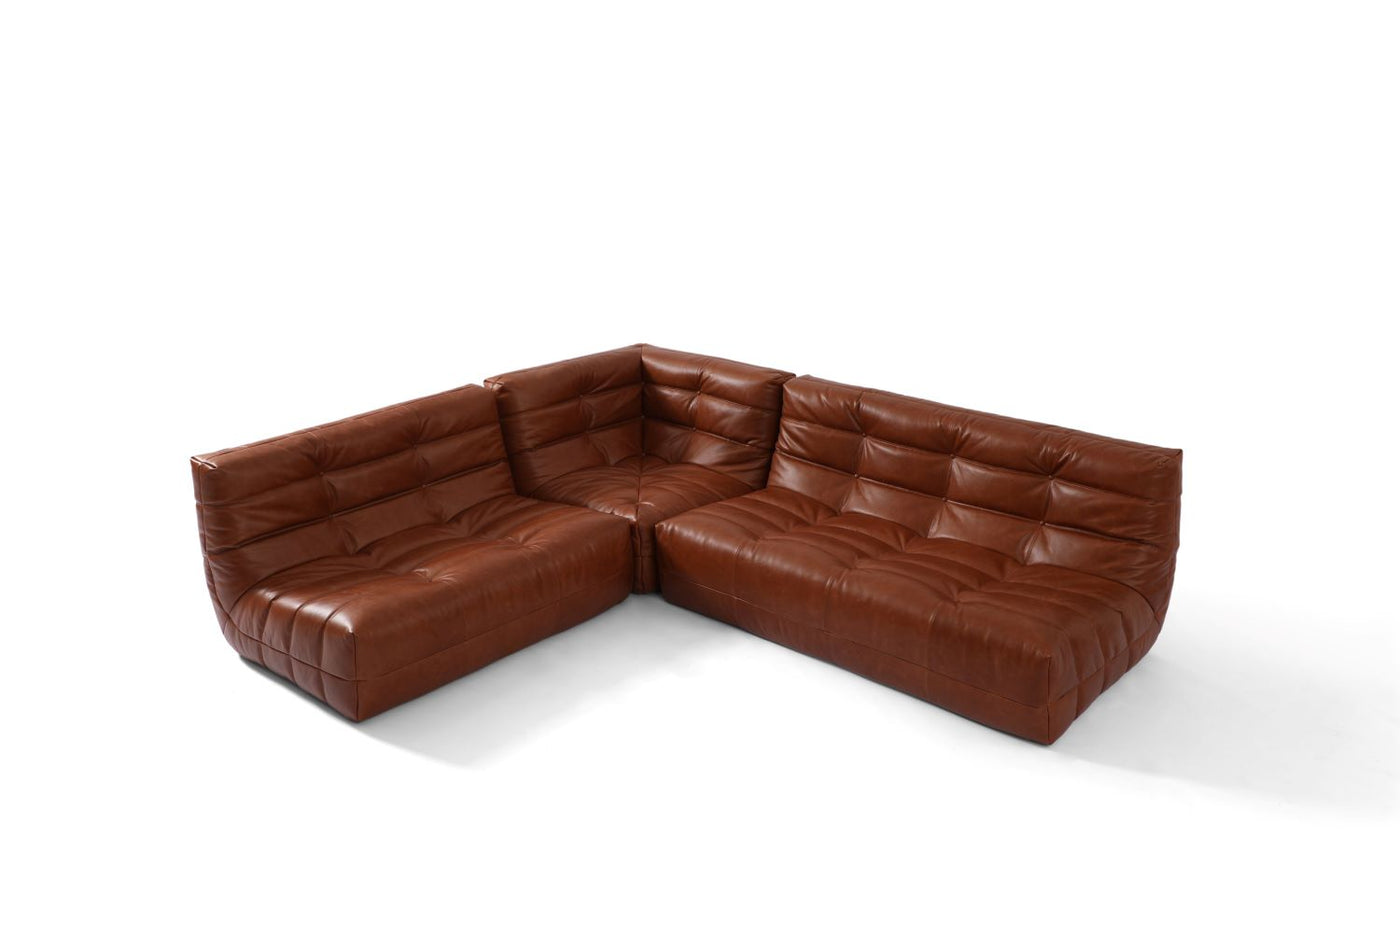 Russo2 sectionals in Soft Vintage leather